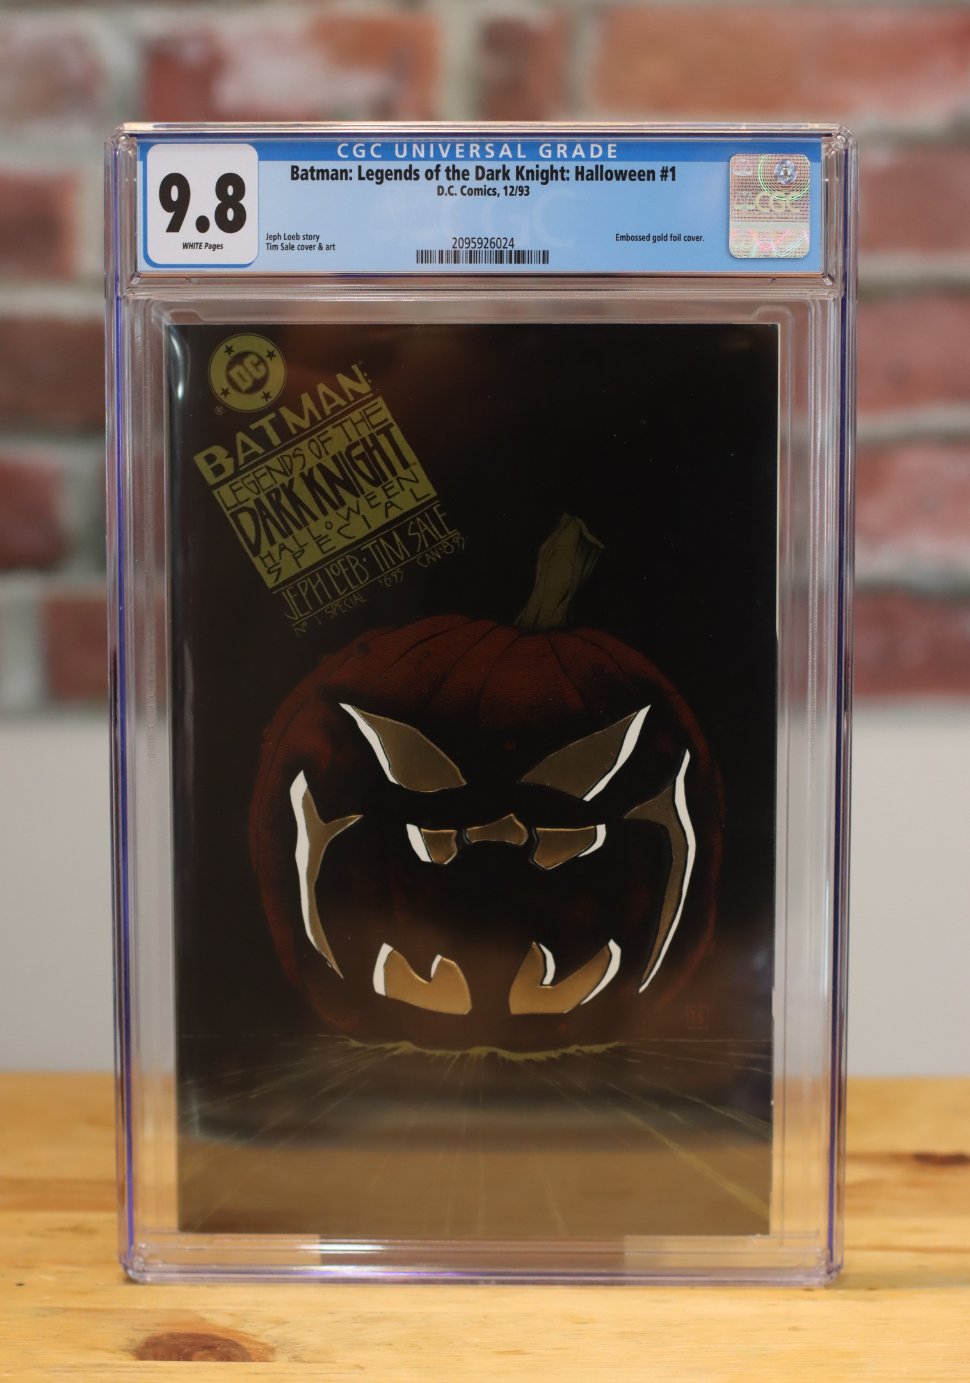 Batman: Legends Of The Darknight Halloween #1 Graded CGC 9.8 Comic Book Rare Embossed Gold Foil Cover